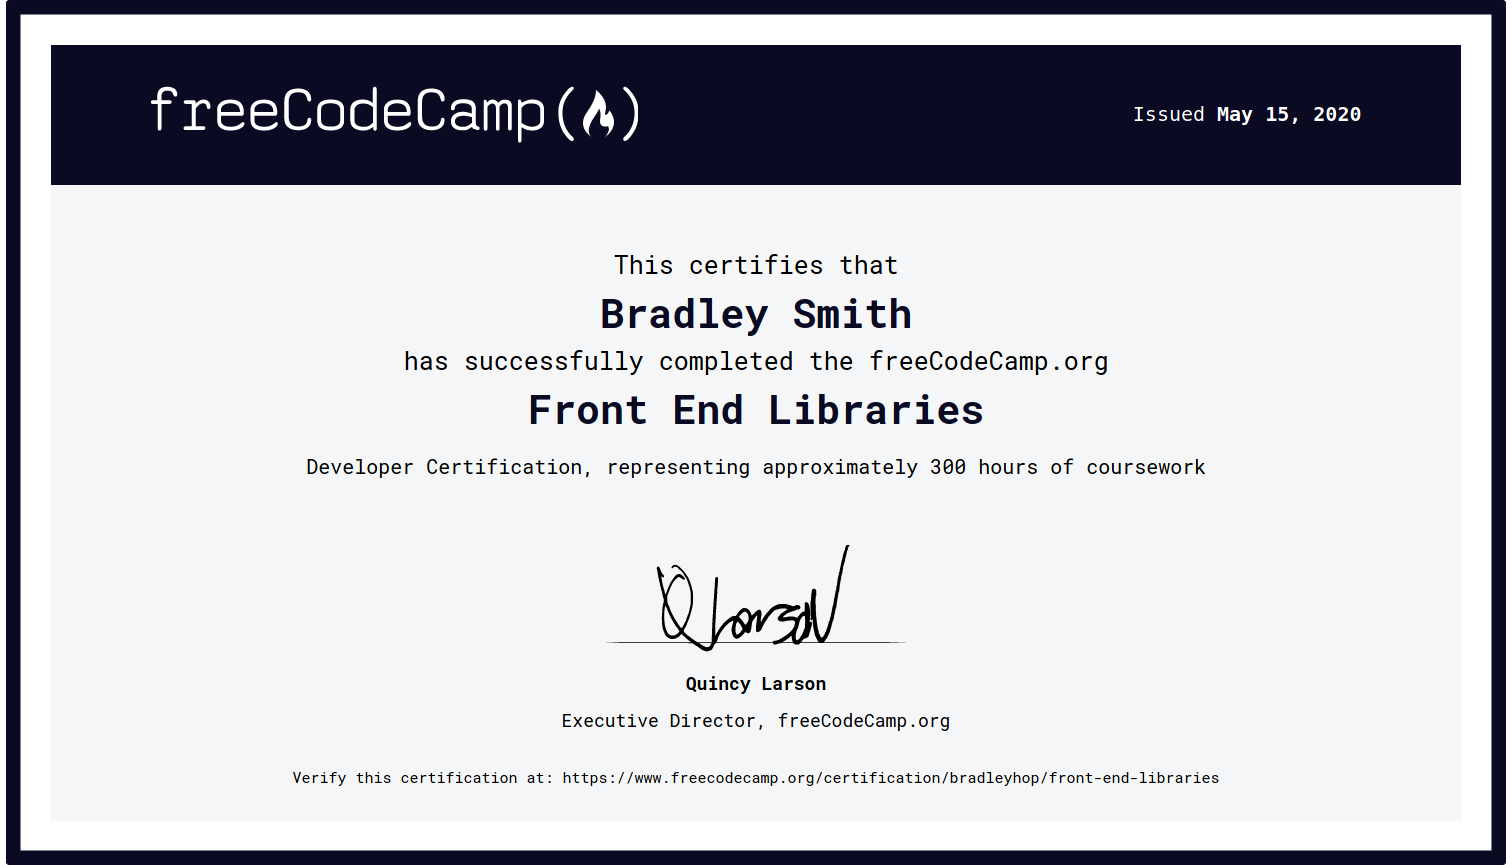 screenshot of front end libraries certificate